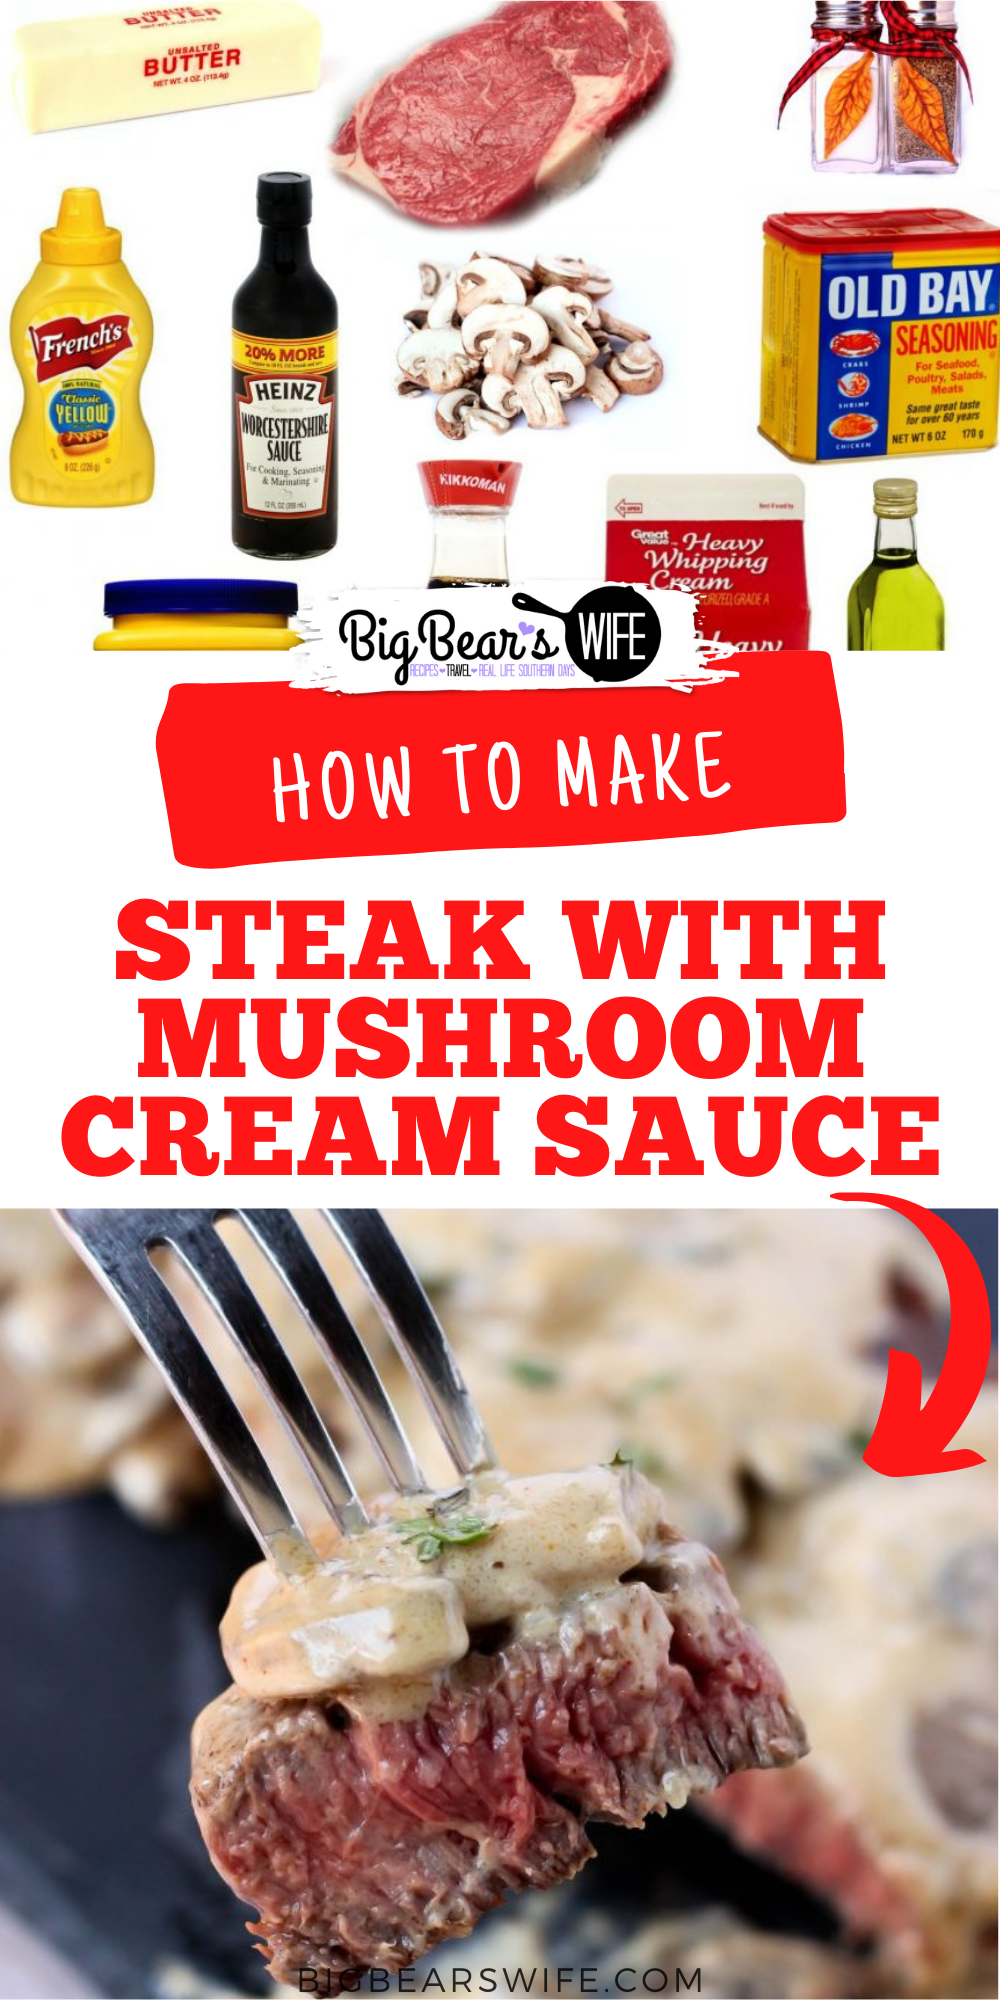 Eating low carb doesn't mean that you have to sacrifice flavor! This Steak with Mushroom Cream Sauce is so amazing that "low carb" won't even matter! You can also make this sauce for chicken or pork! It's so good! via @bigbearswife